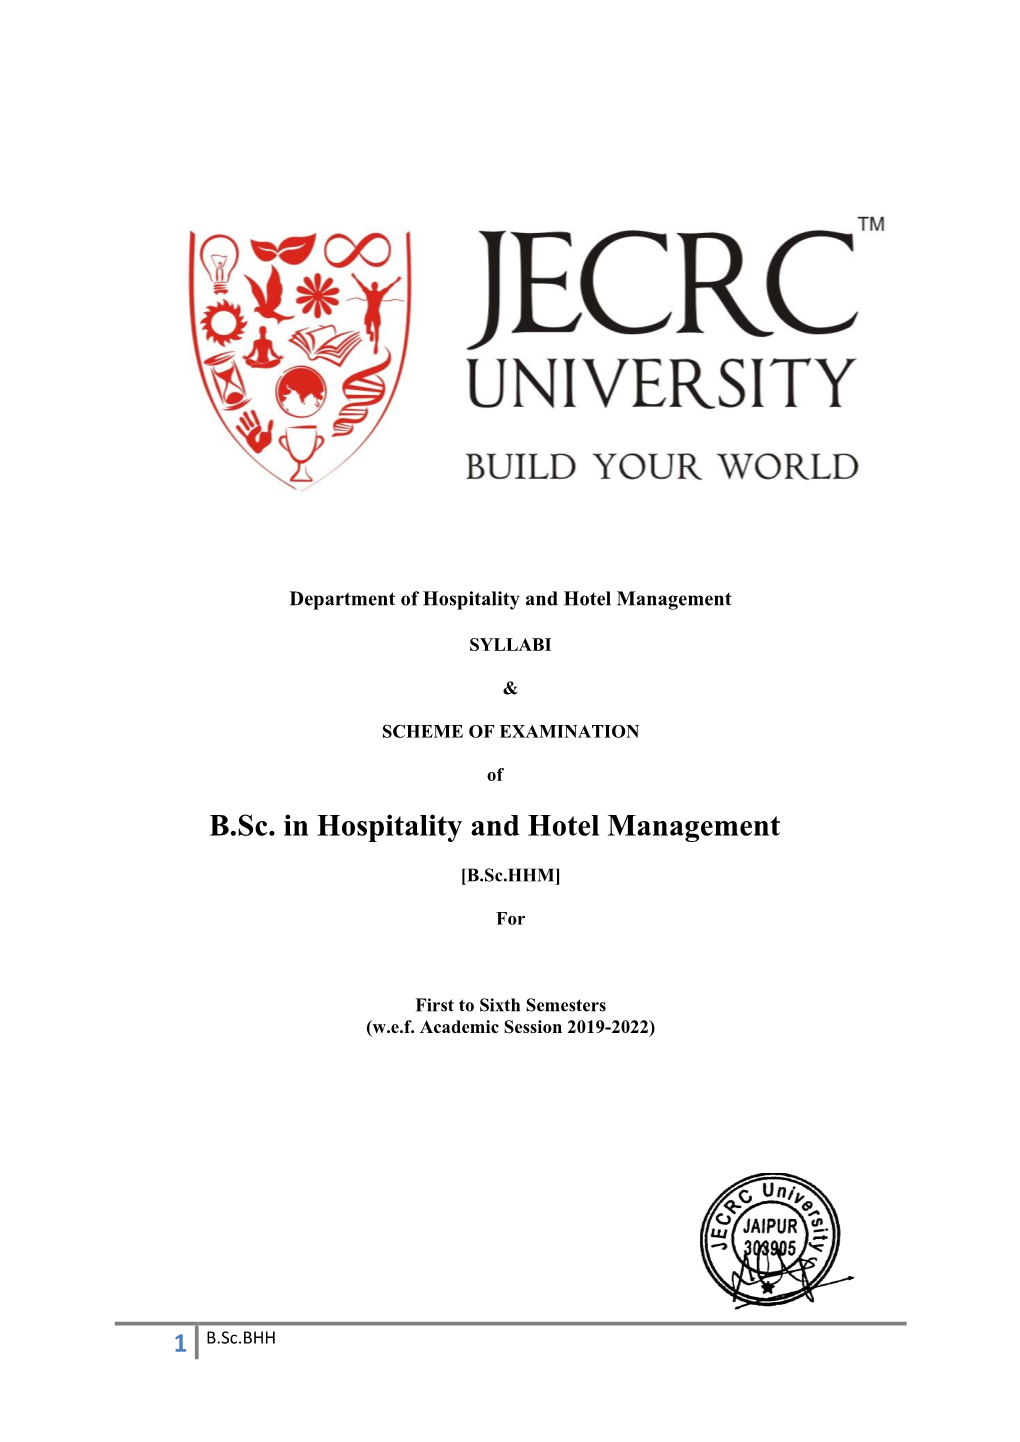 B.Sc. in Hospitality and Hotel Management